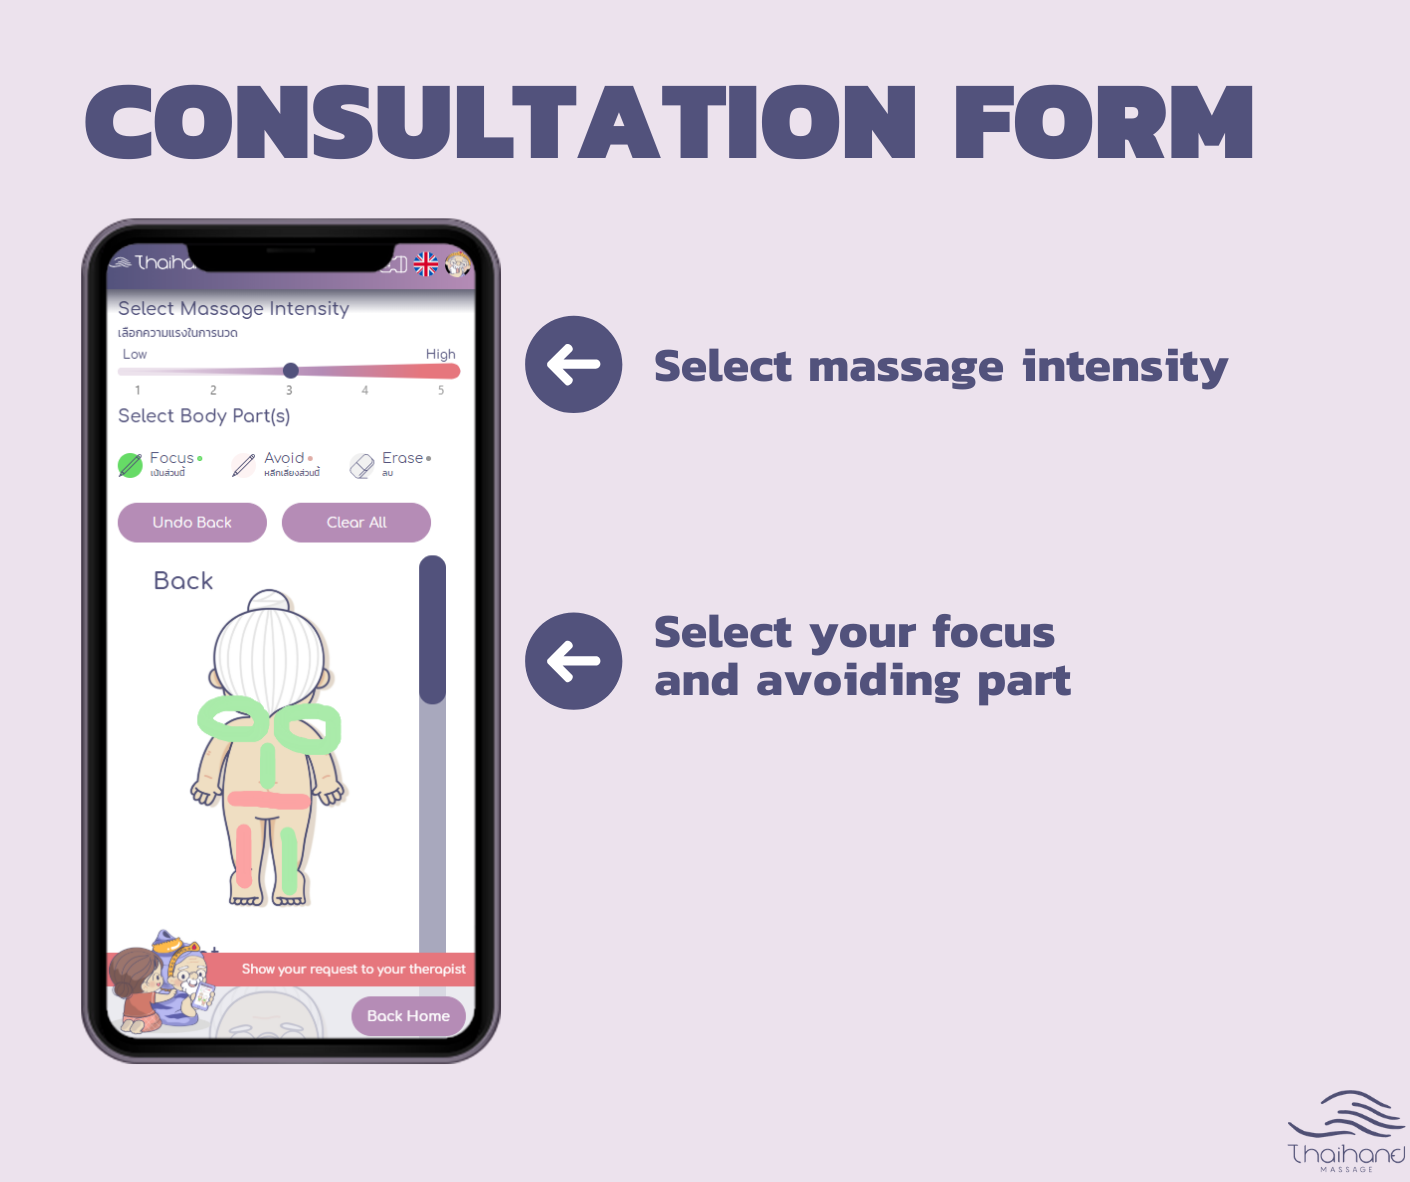 Consultation Form to address the intensity level and spots you want to be massaged.